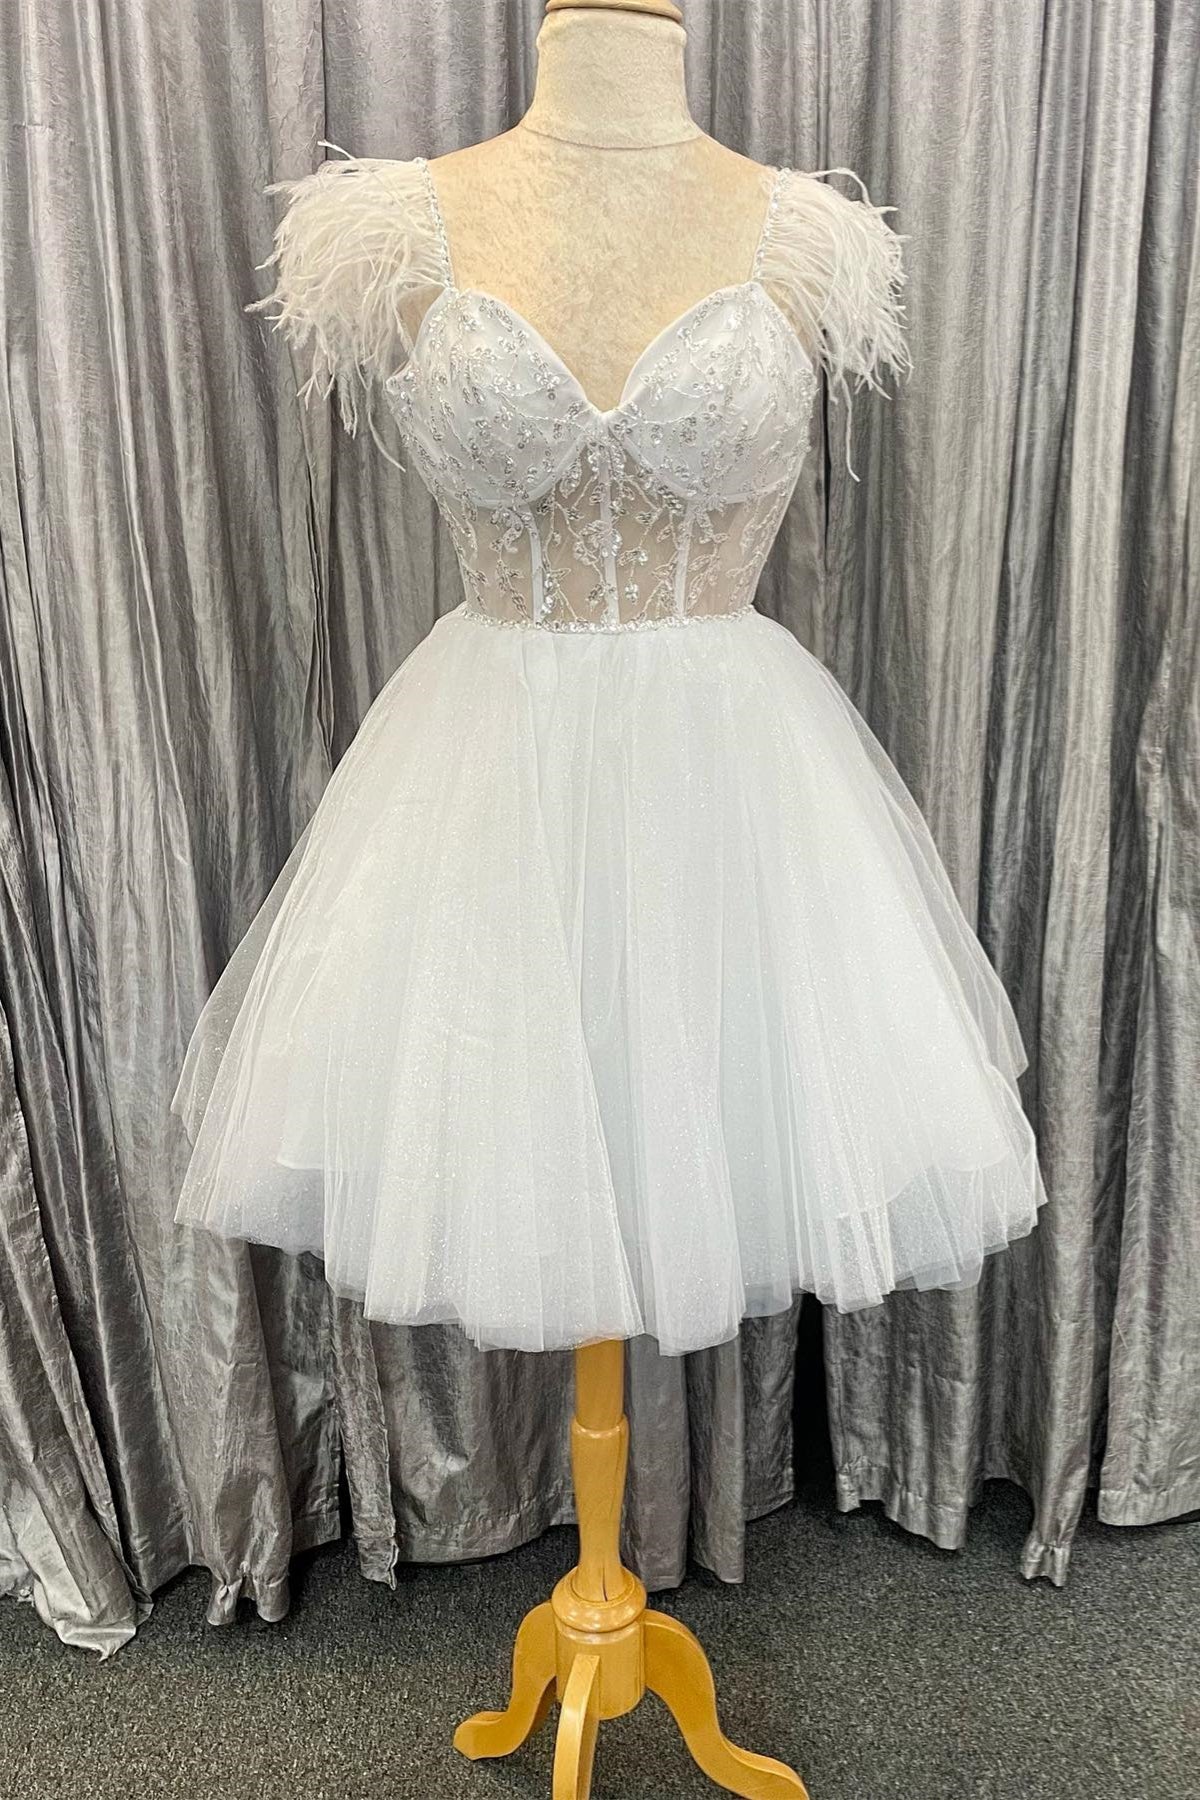 White Sweetheart Feathers Appliques Tulle Corset Homecoming Dress outfit, Homecoming Dresses Short